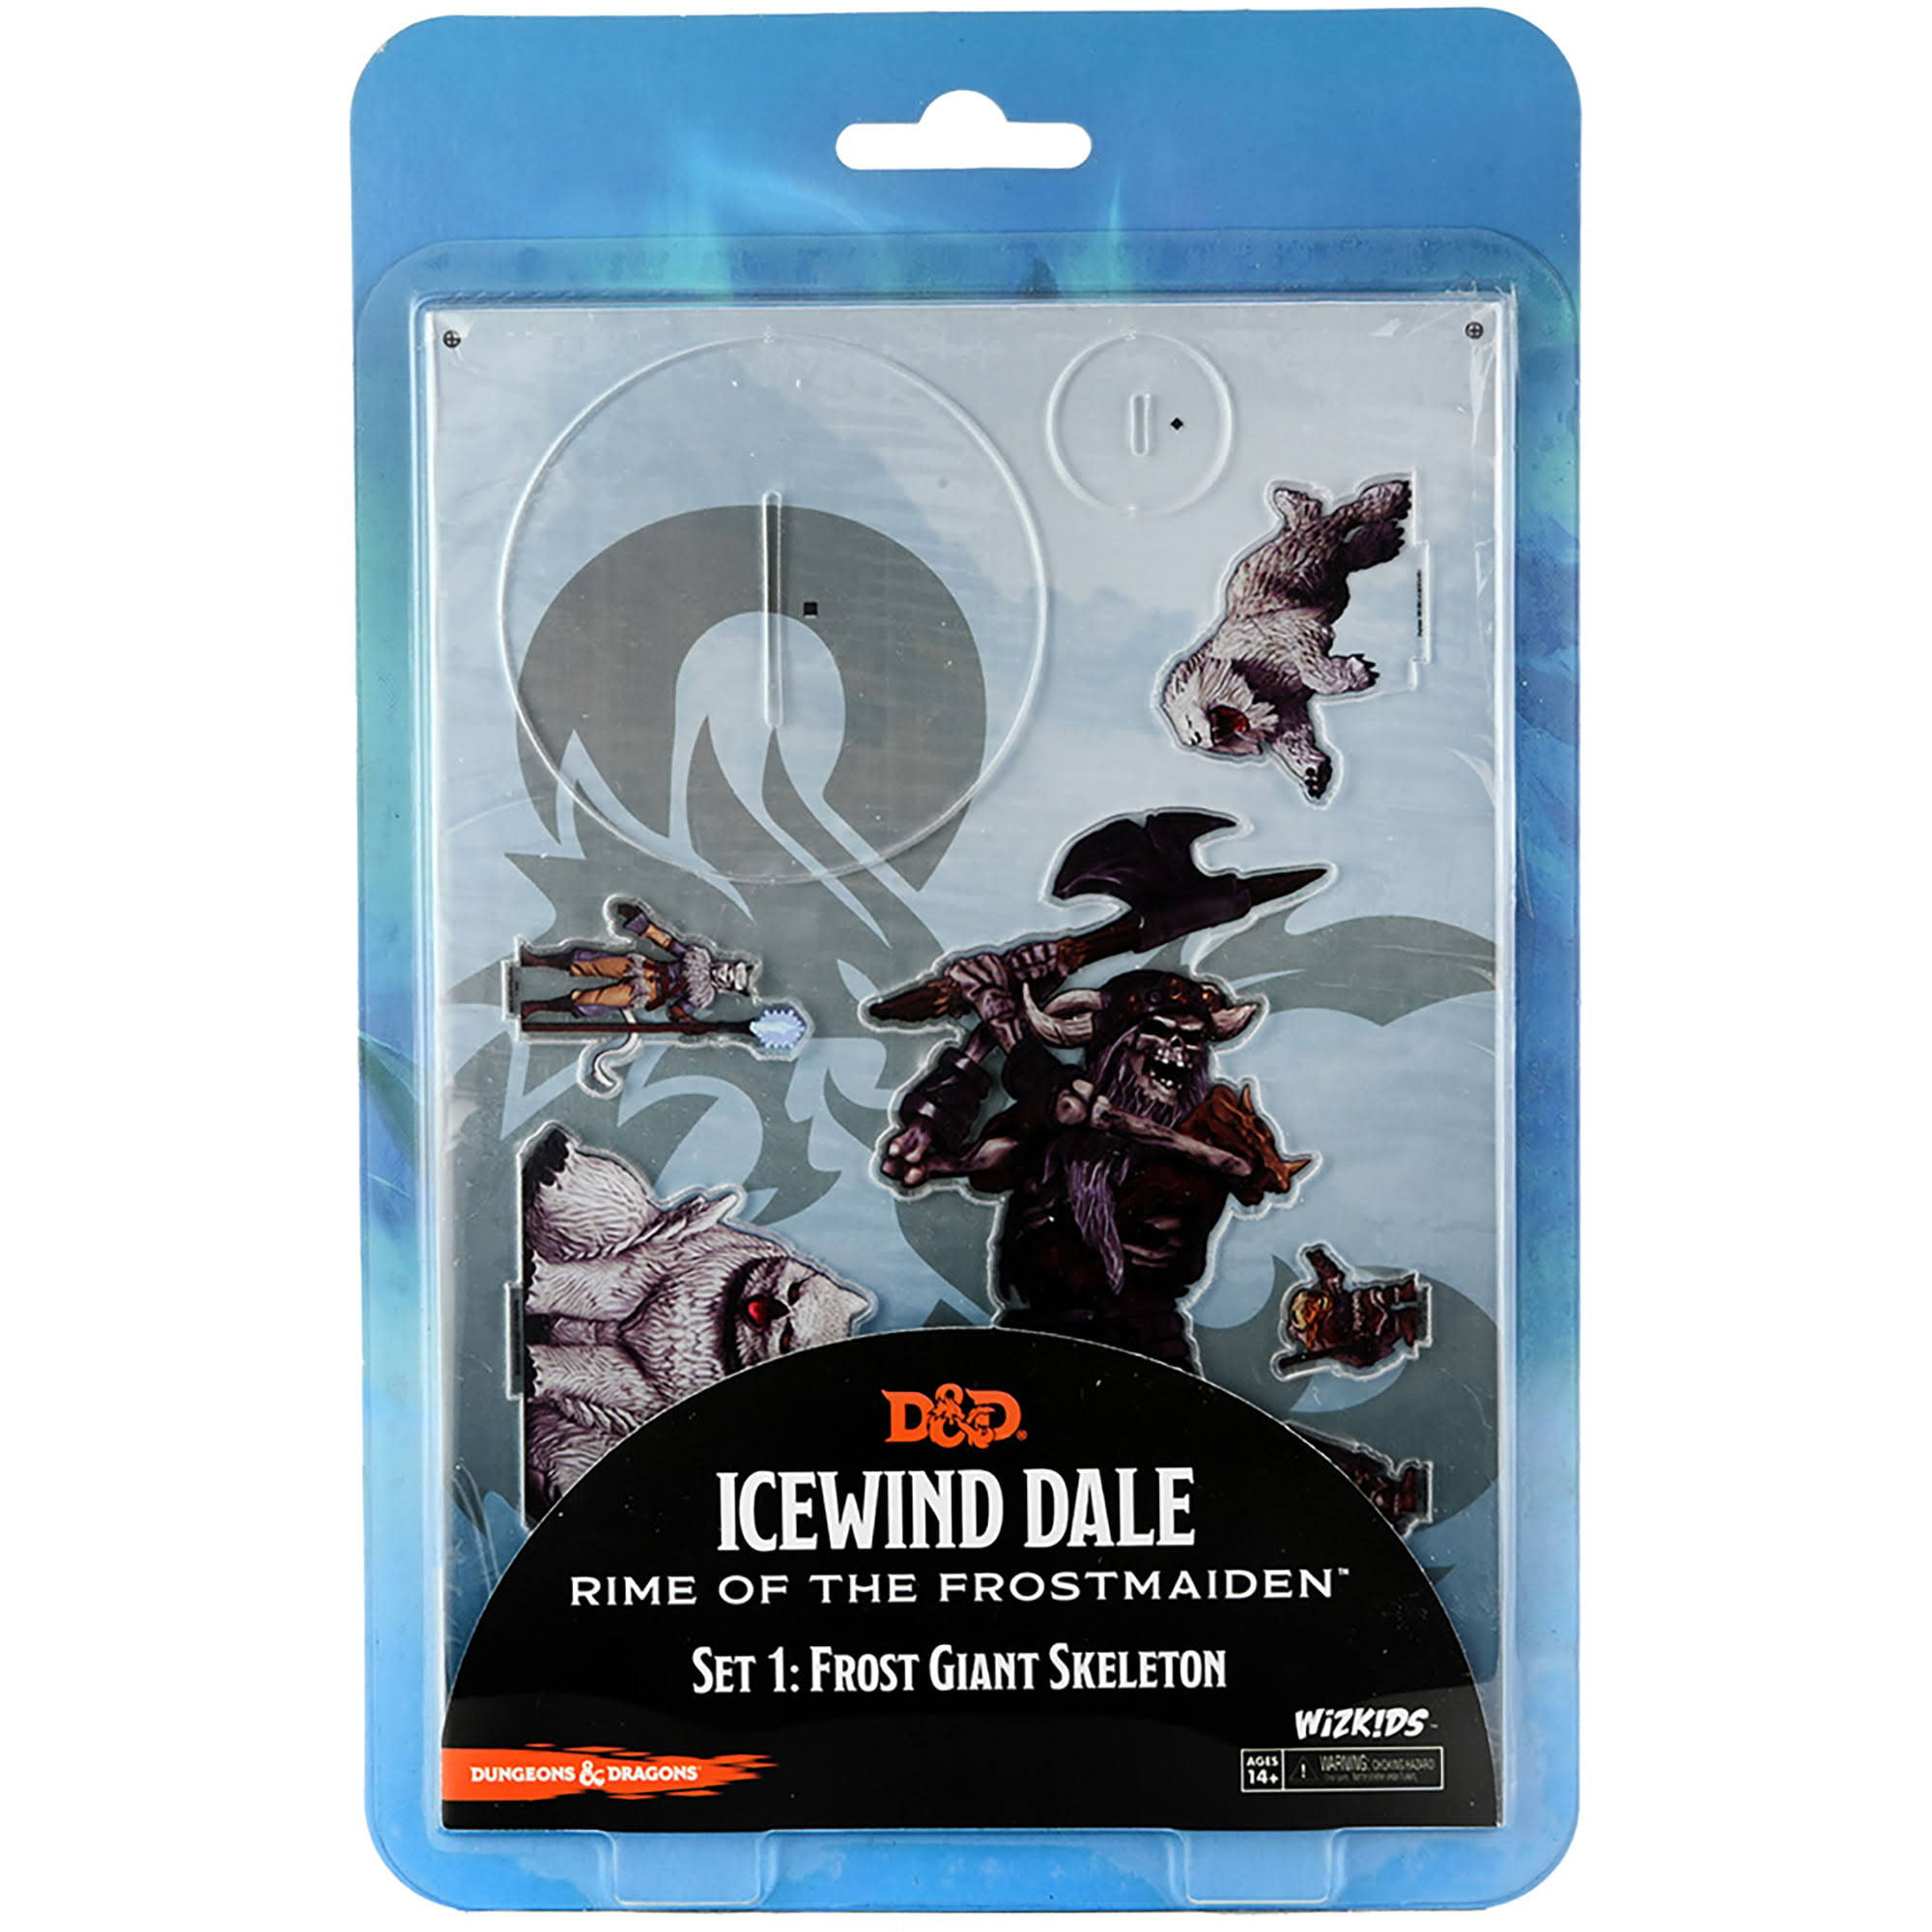 D&D Idols of The Realms Miniatures Icewind Dale Rime of The Frostmaiden - 2D Frost Giant Skeleton